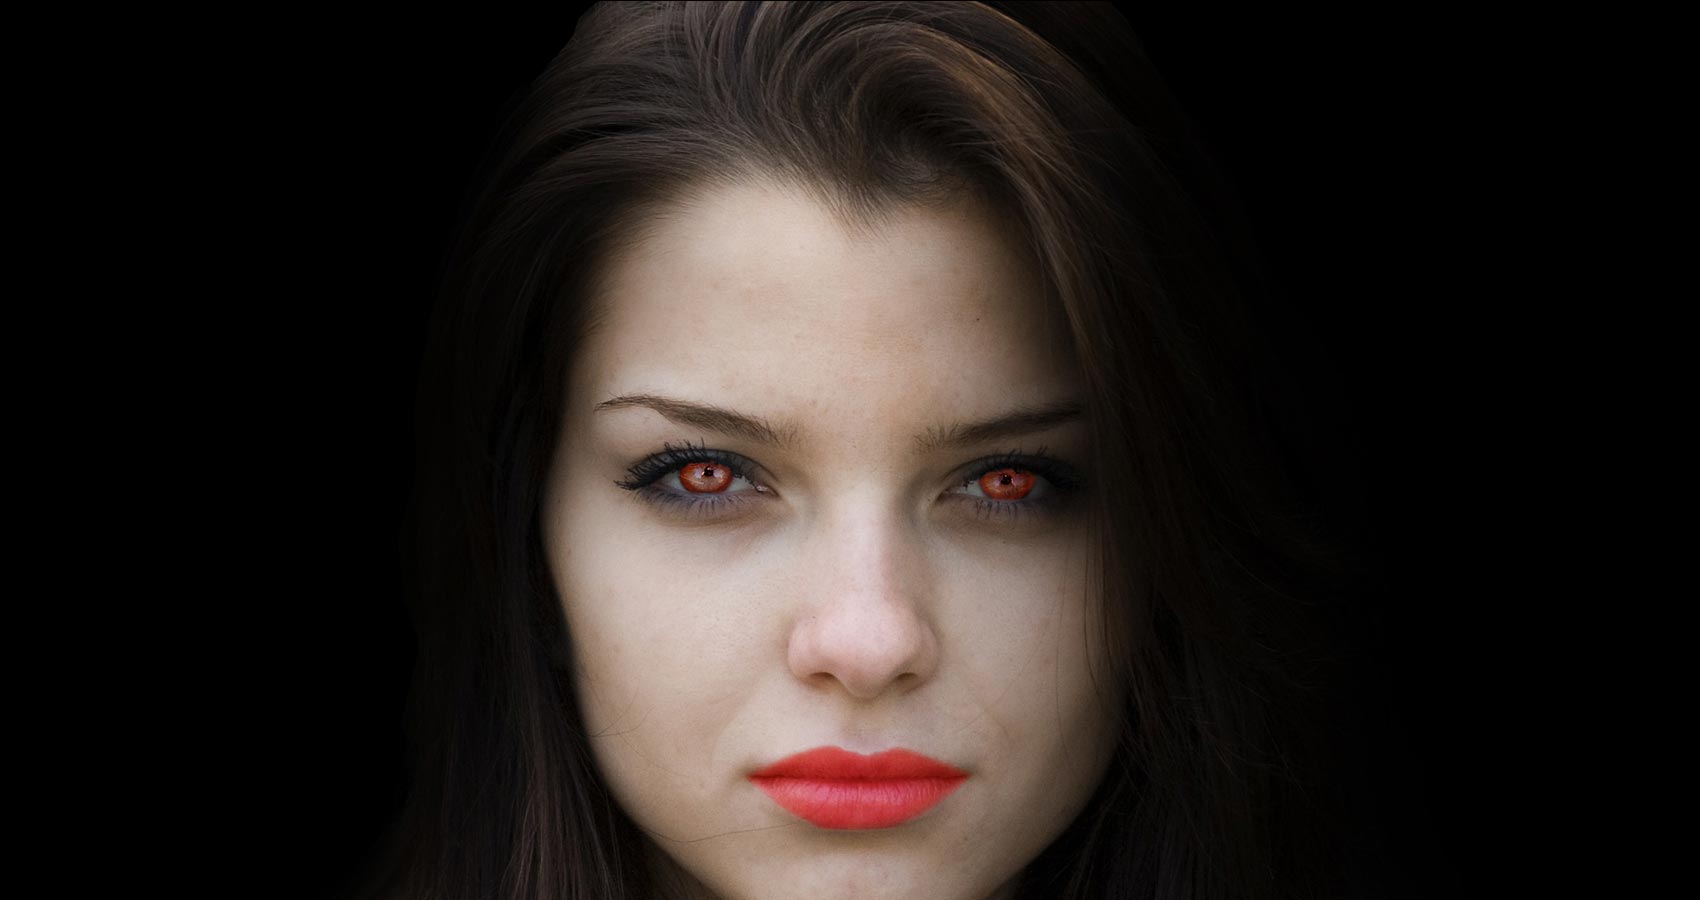 Dance With The Devil, short story by Michael Danese at Spillwords.com